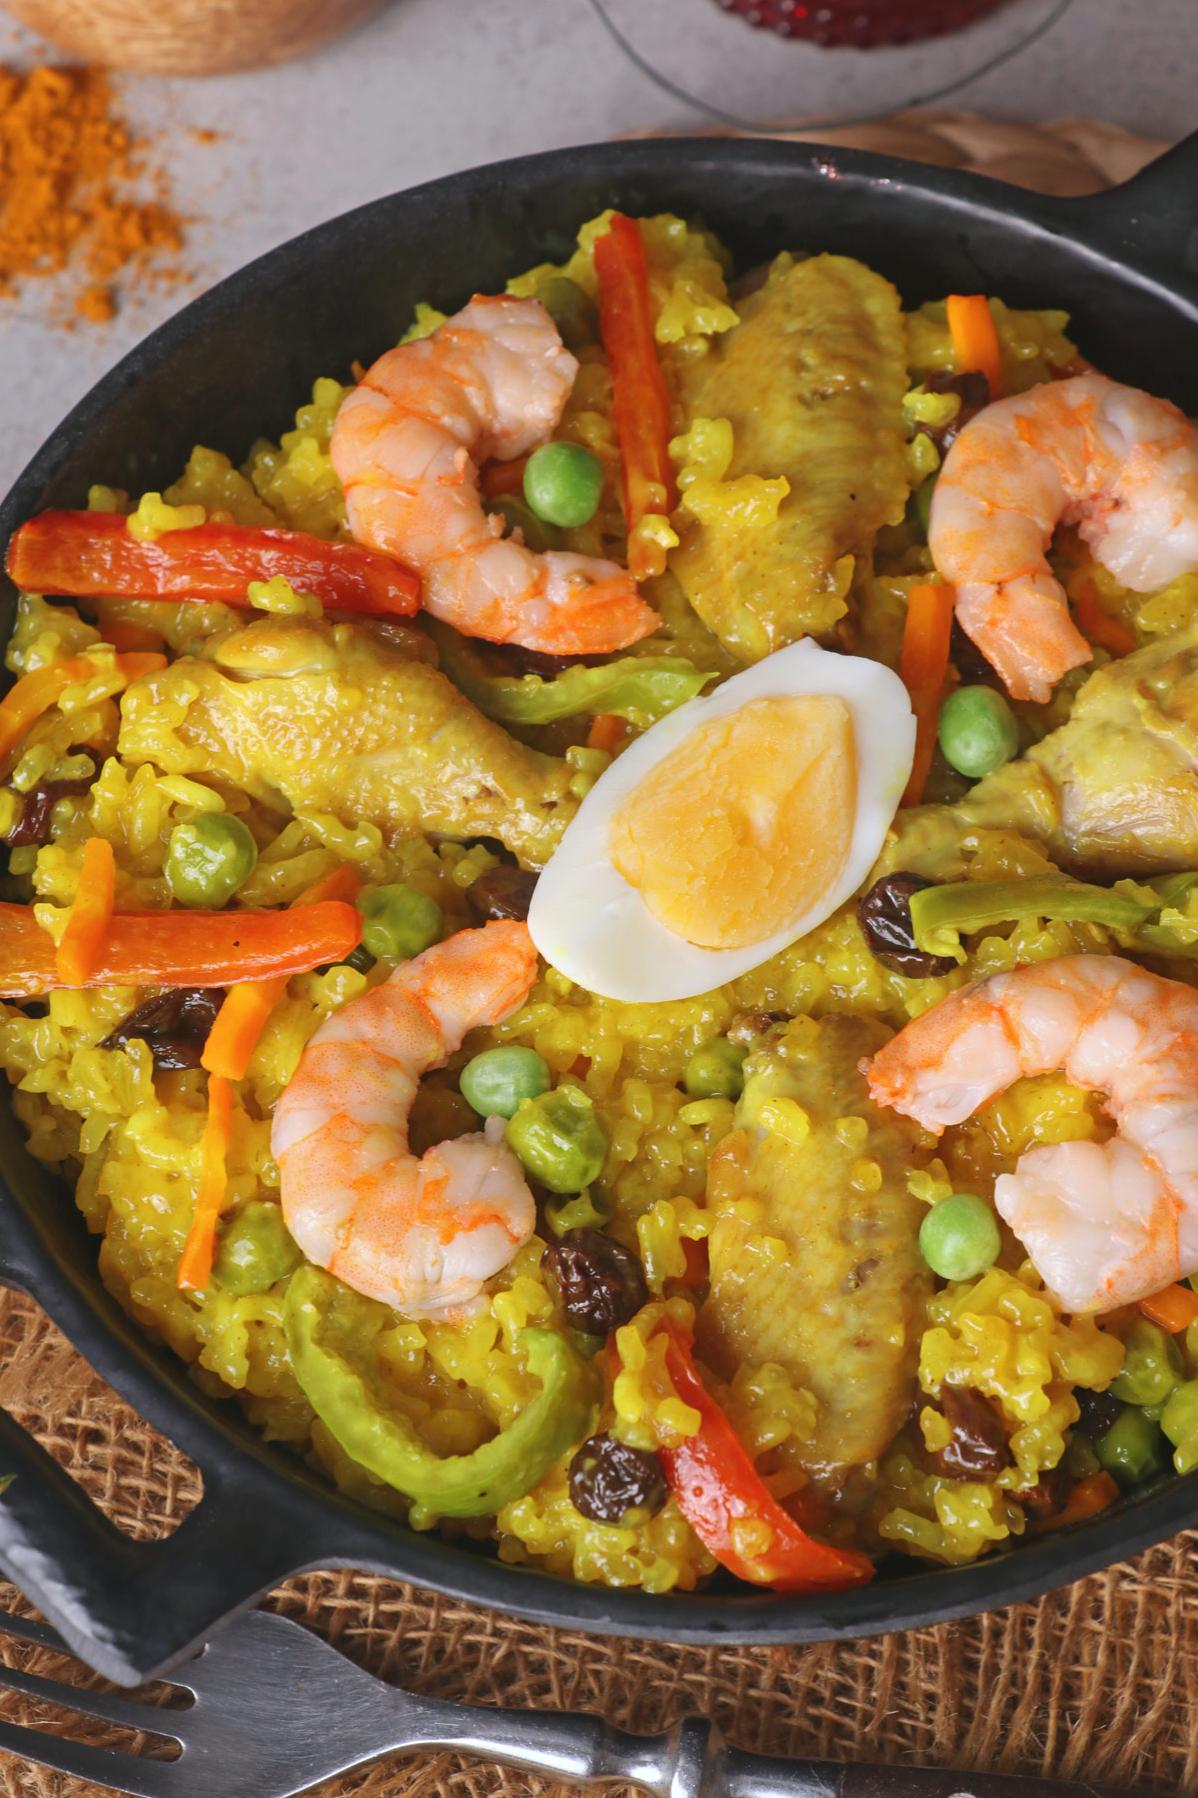  This colorful rice dish is a feast for the eyes and the palate!